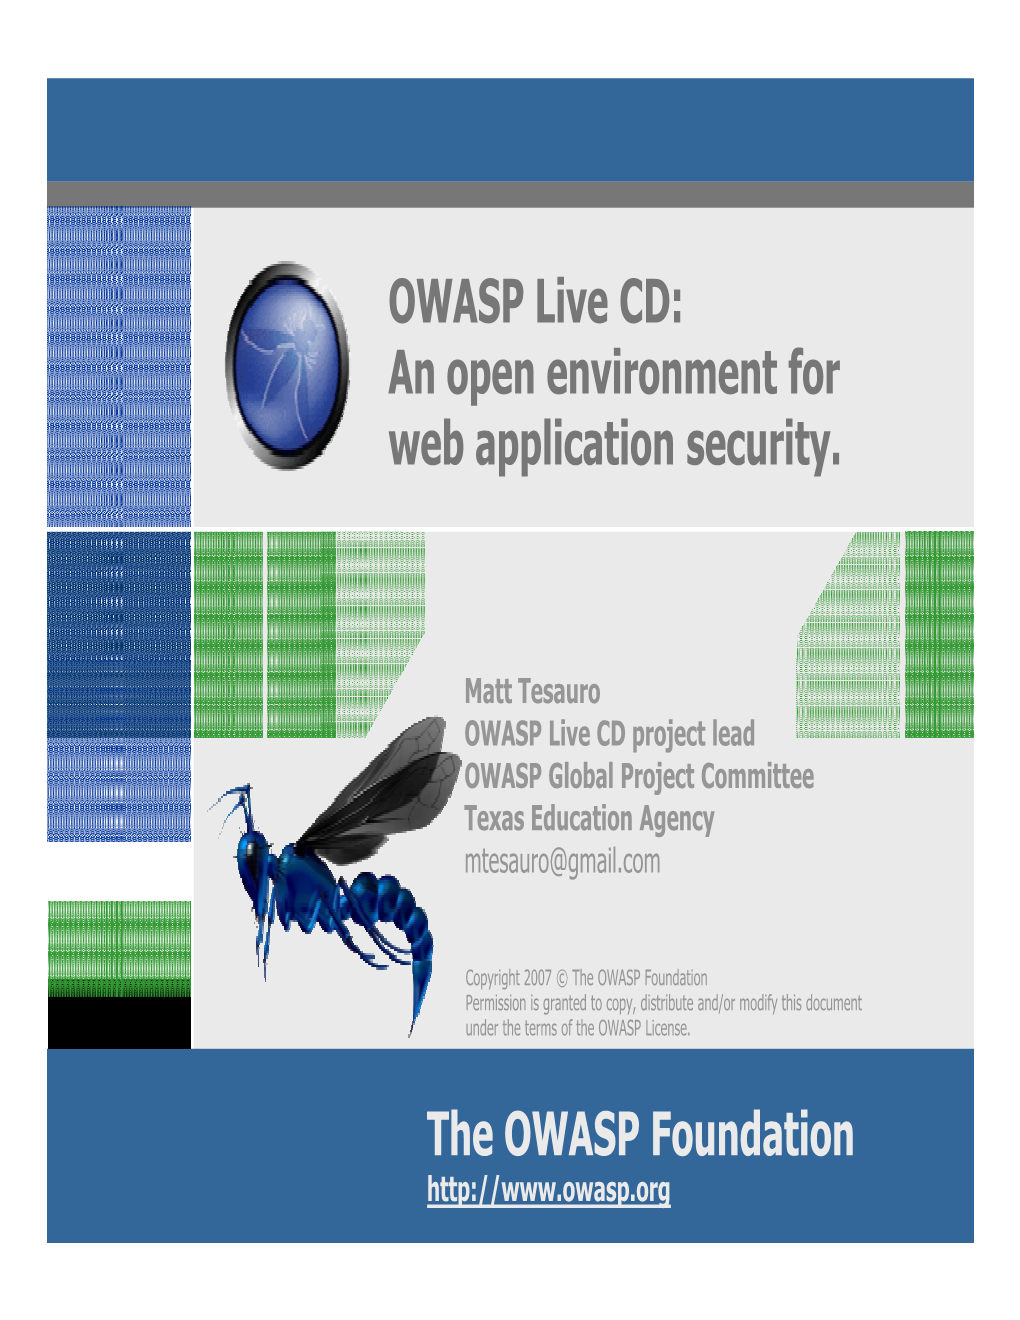 OWASP Live CD: an Open Environment for Web Application Security